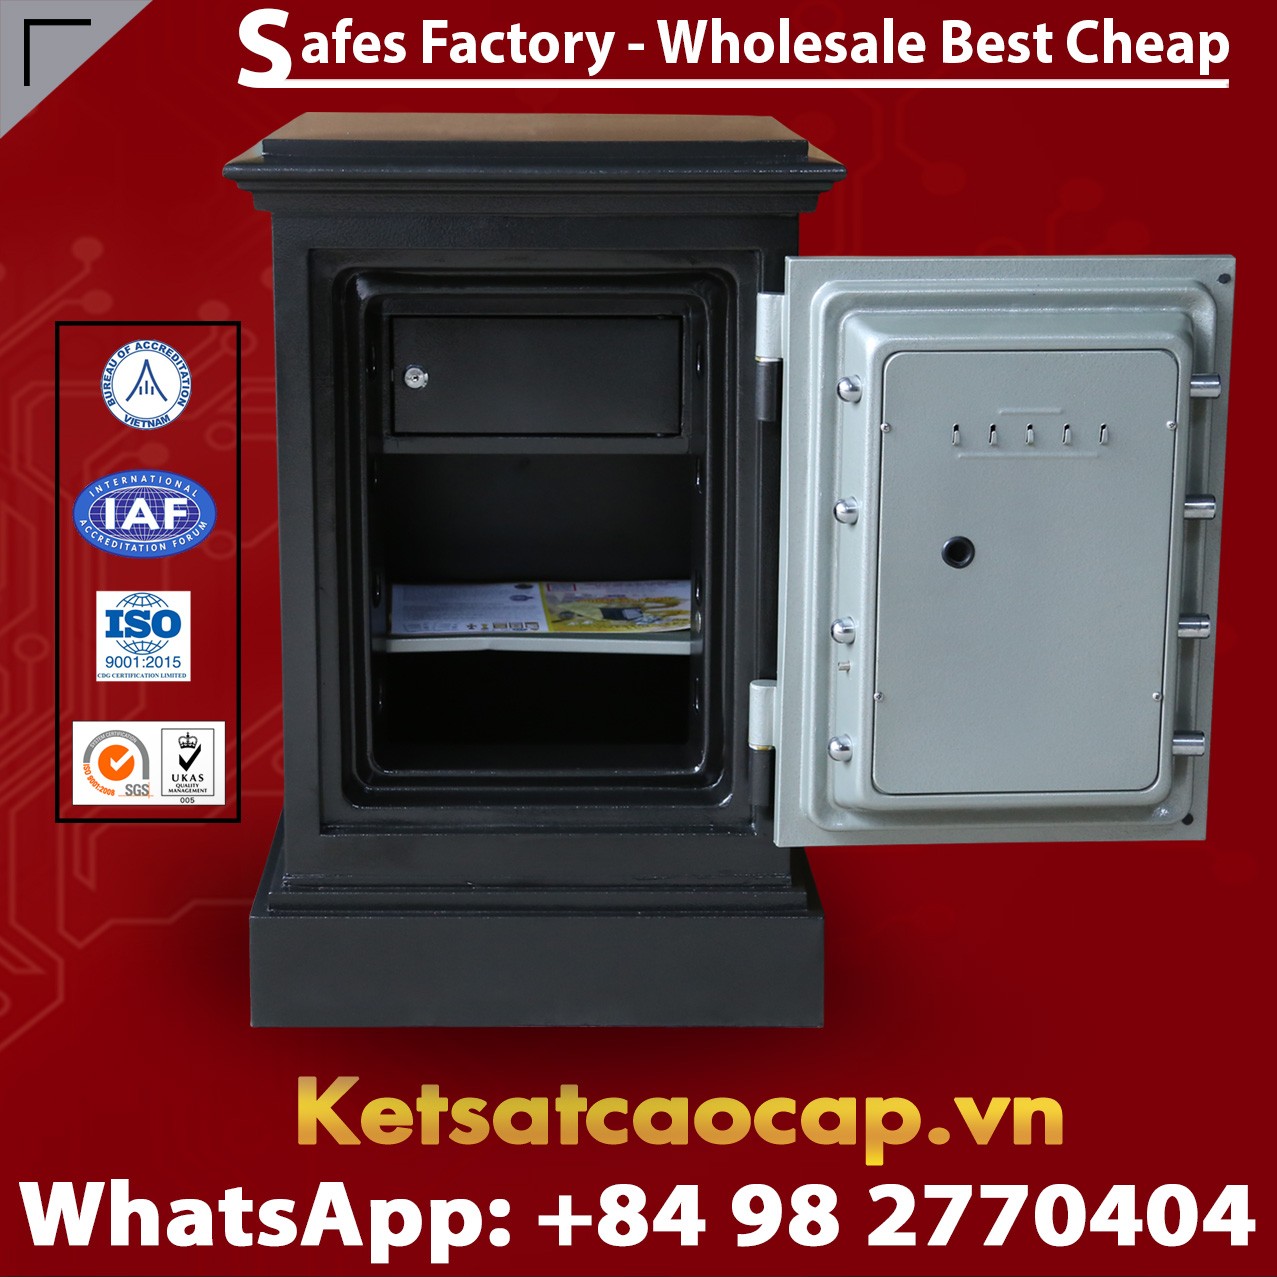 Home Safes made in Viet Nam